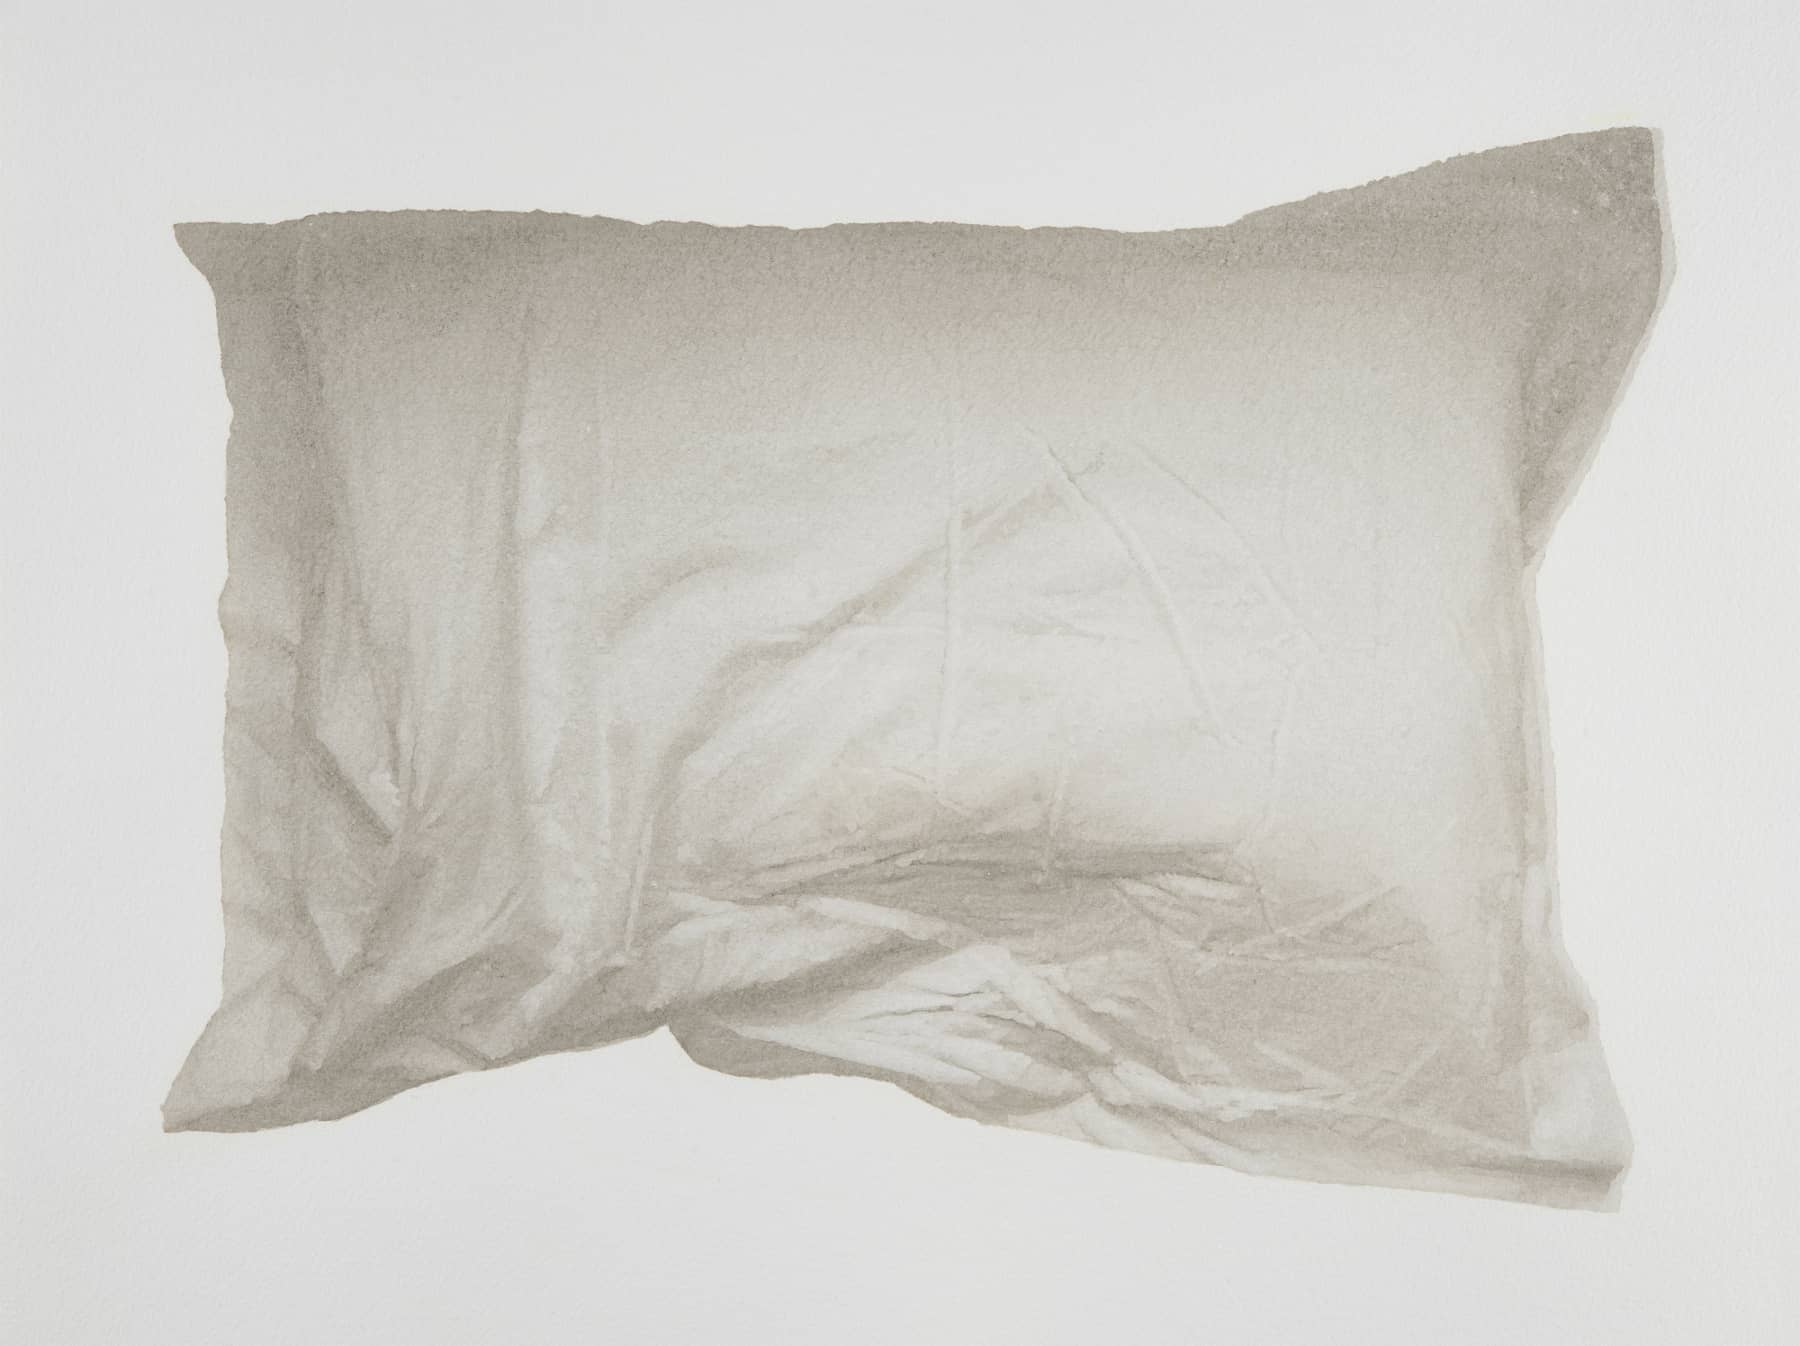 2_Jonathan Rosic_Untitled (Pillow 1)_2019_indian ink on paper_35x45cm